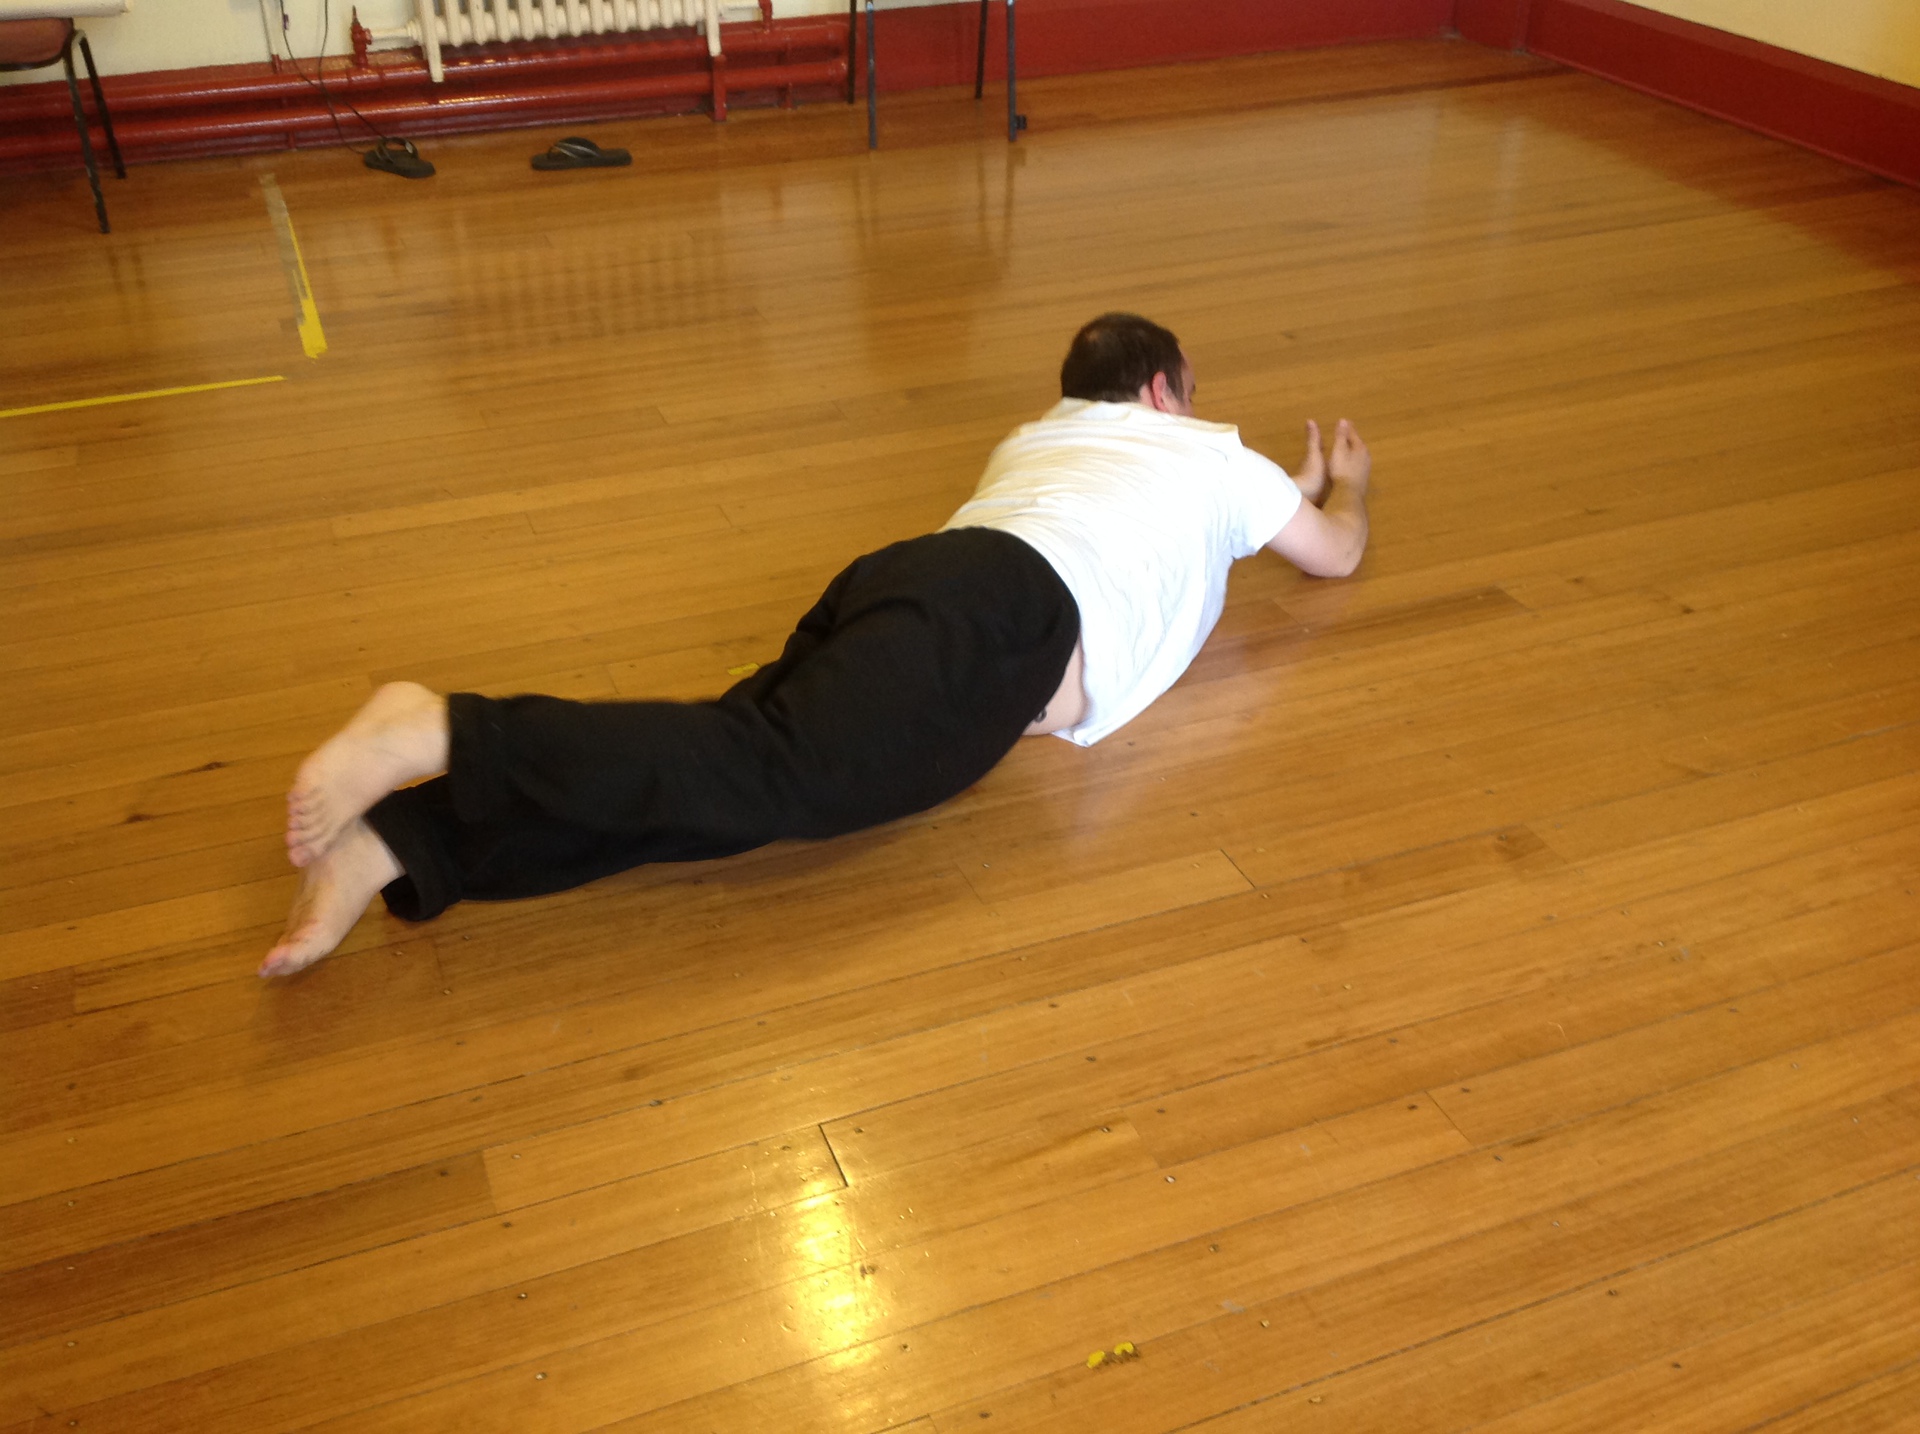 Photo demonstrating rolling